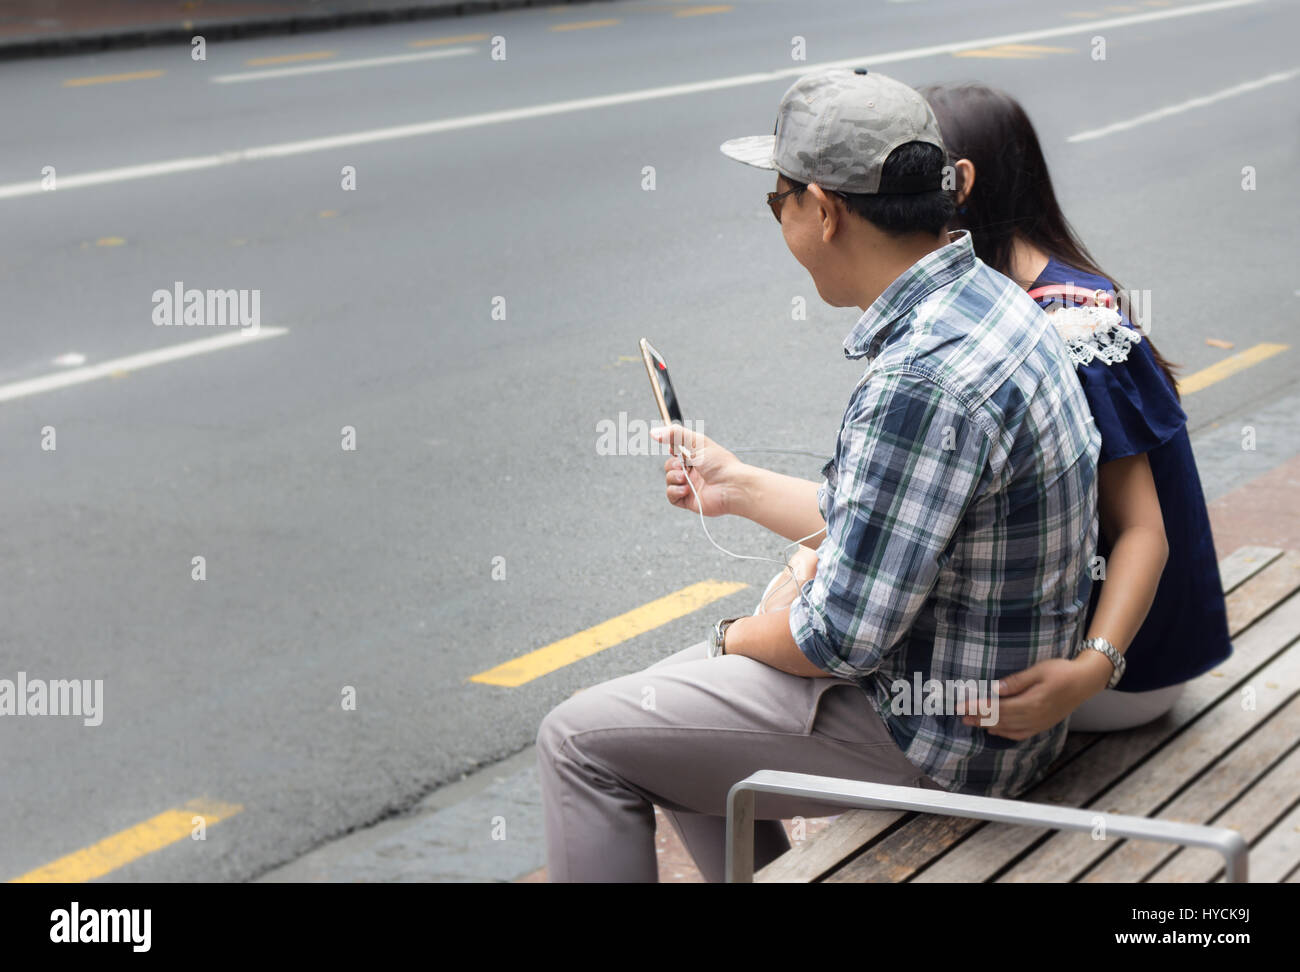 Auckland - February 17, 2017: Asian couple having a video chat sittiing at Queen Street in Auckland. Stock Photo